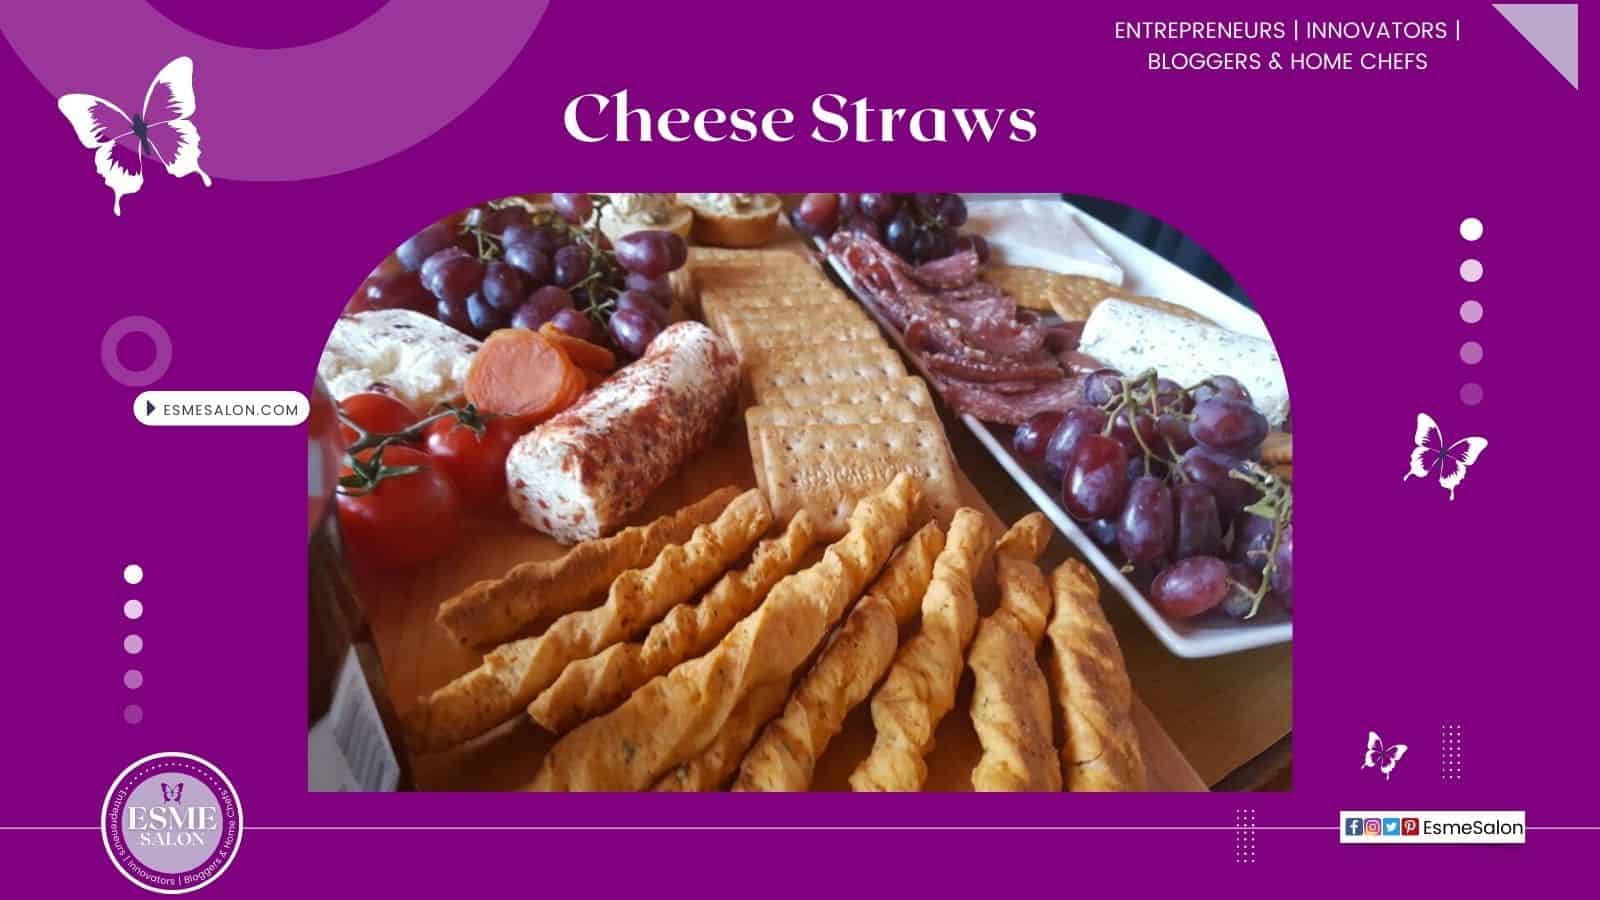 An image of a platter with Cheese Straws, cheese, grapes and crackers